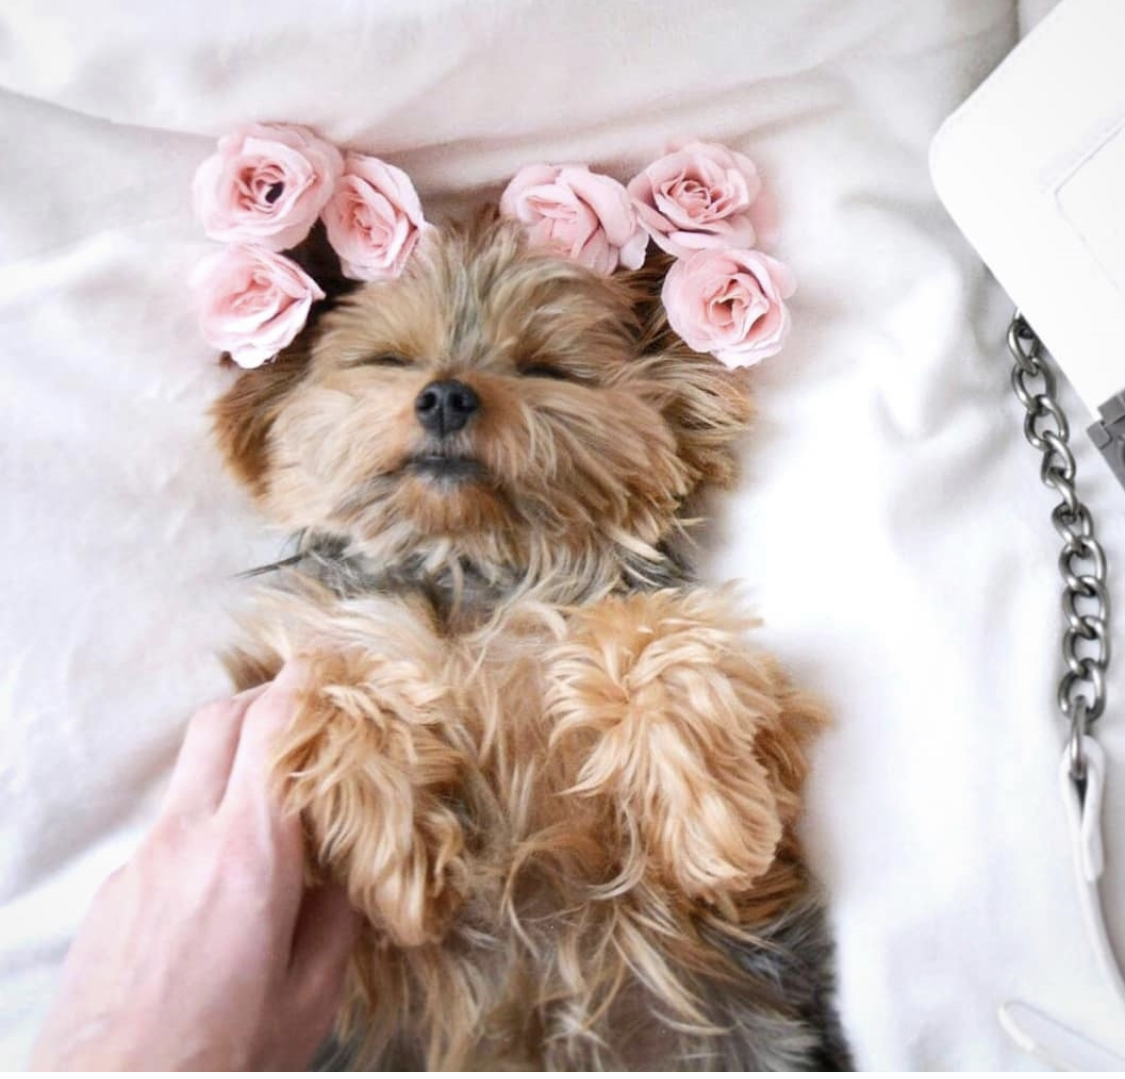 sleeping Yorkshire Terrier with pink roses around its head while lying on its back